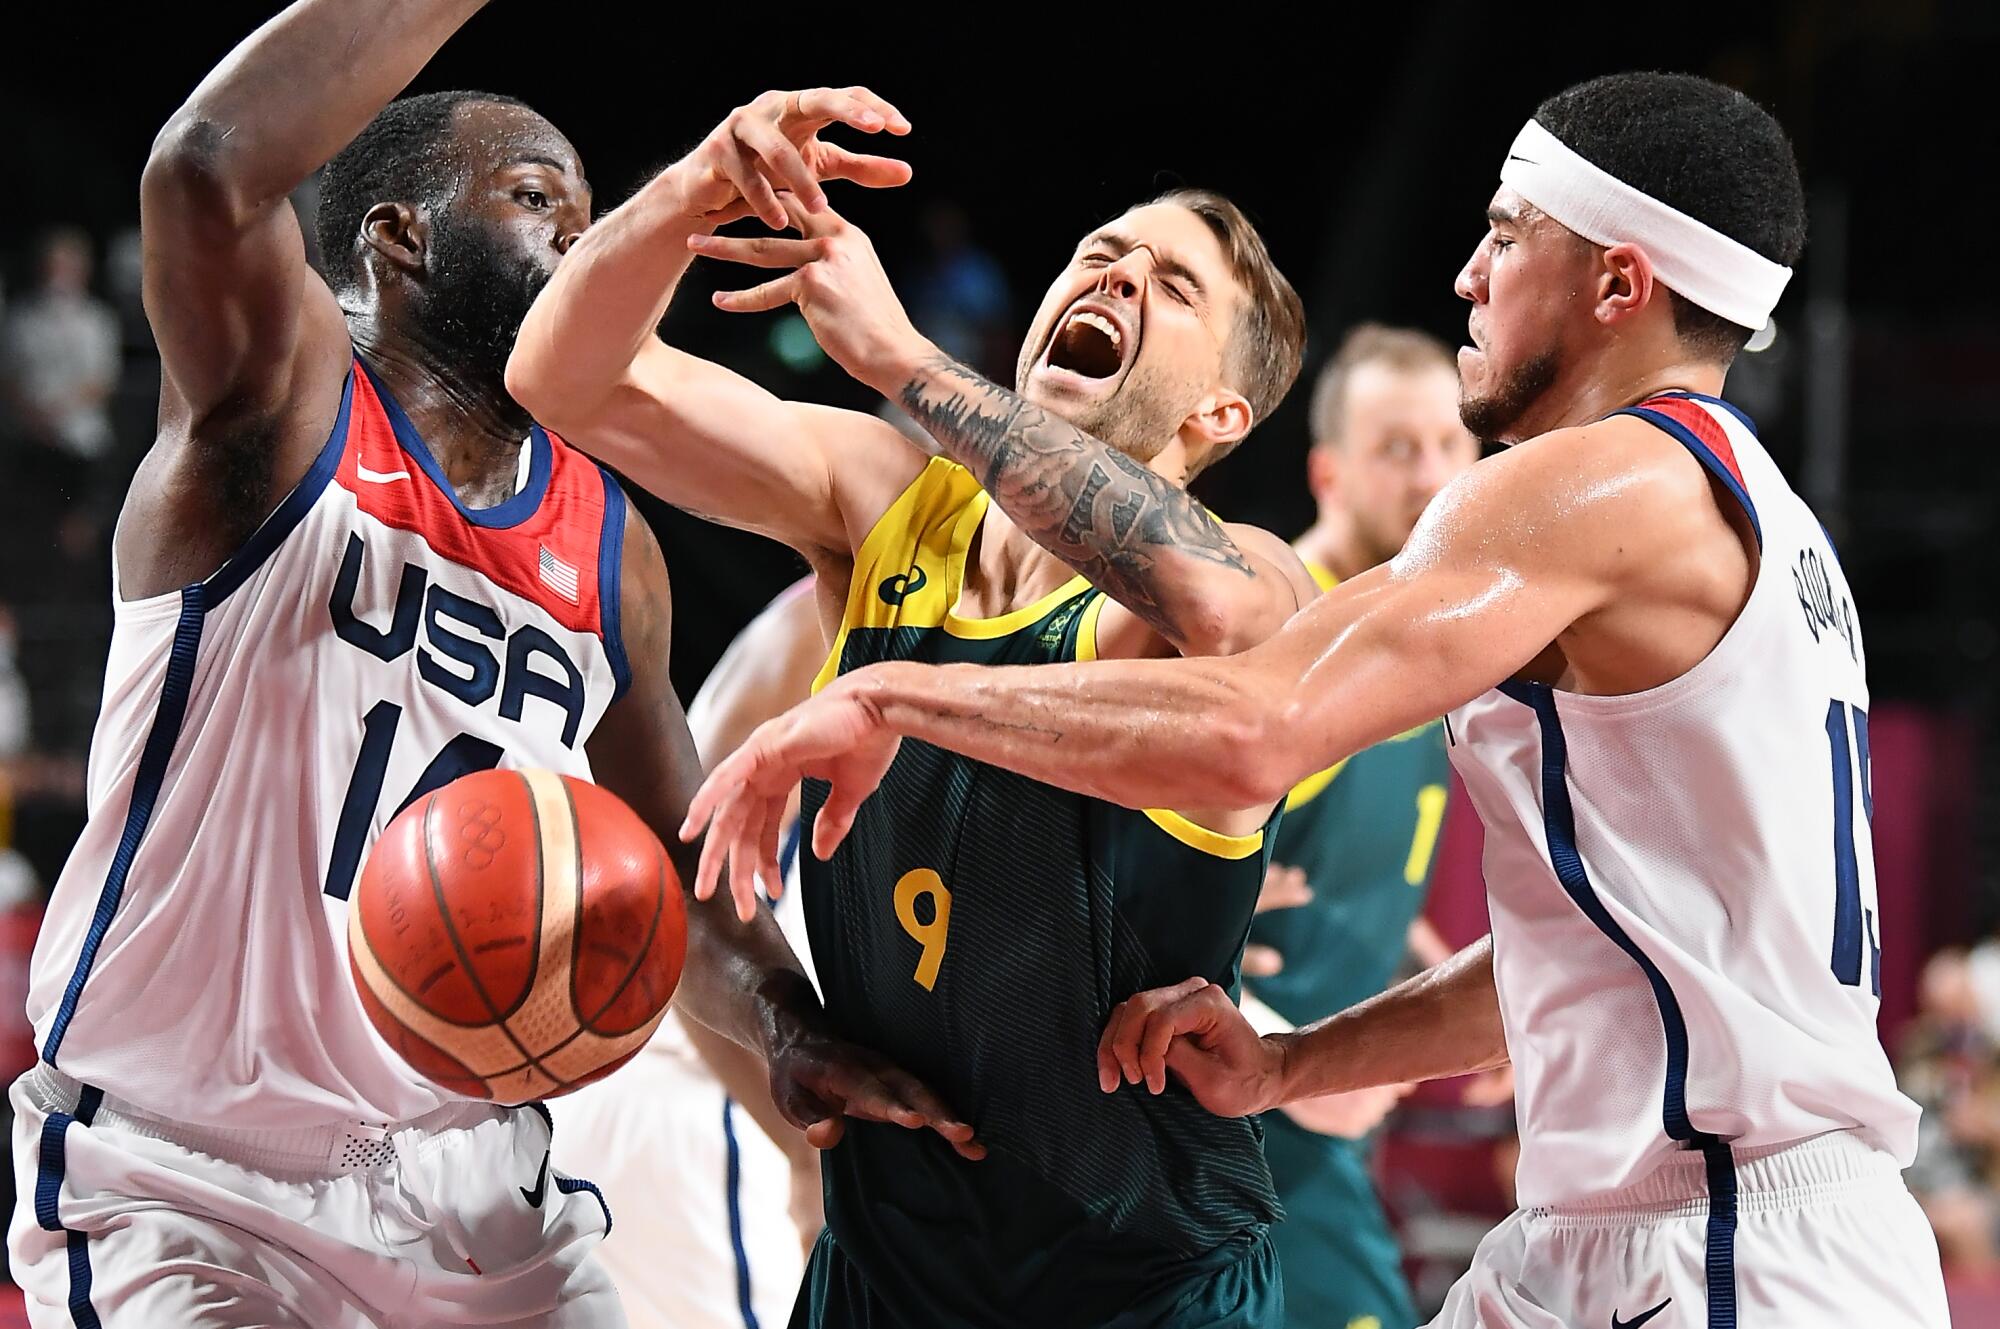 USA's Draymond Green, left, and Devin Booker strip the ball from Australia's Nathan Sobey